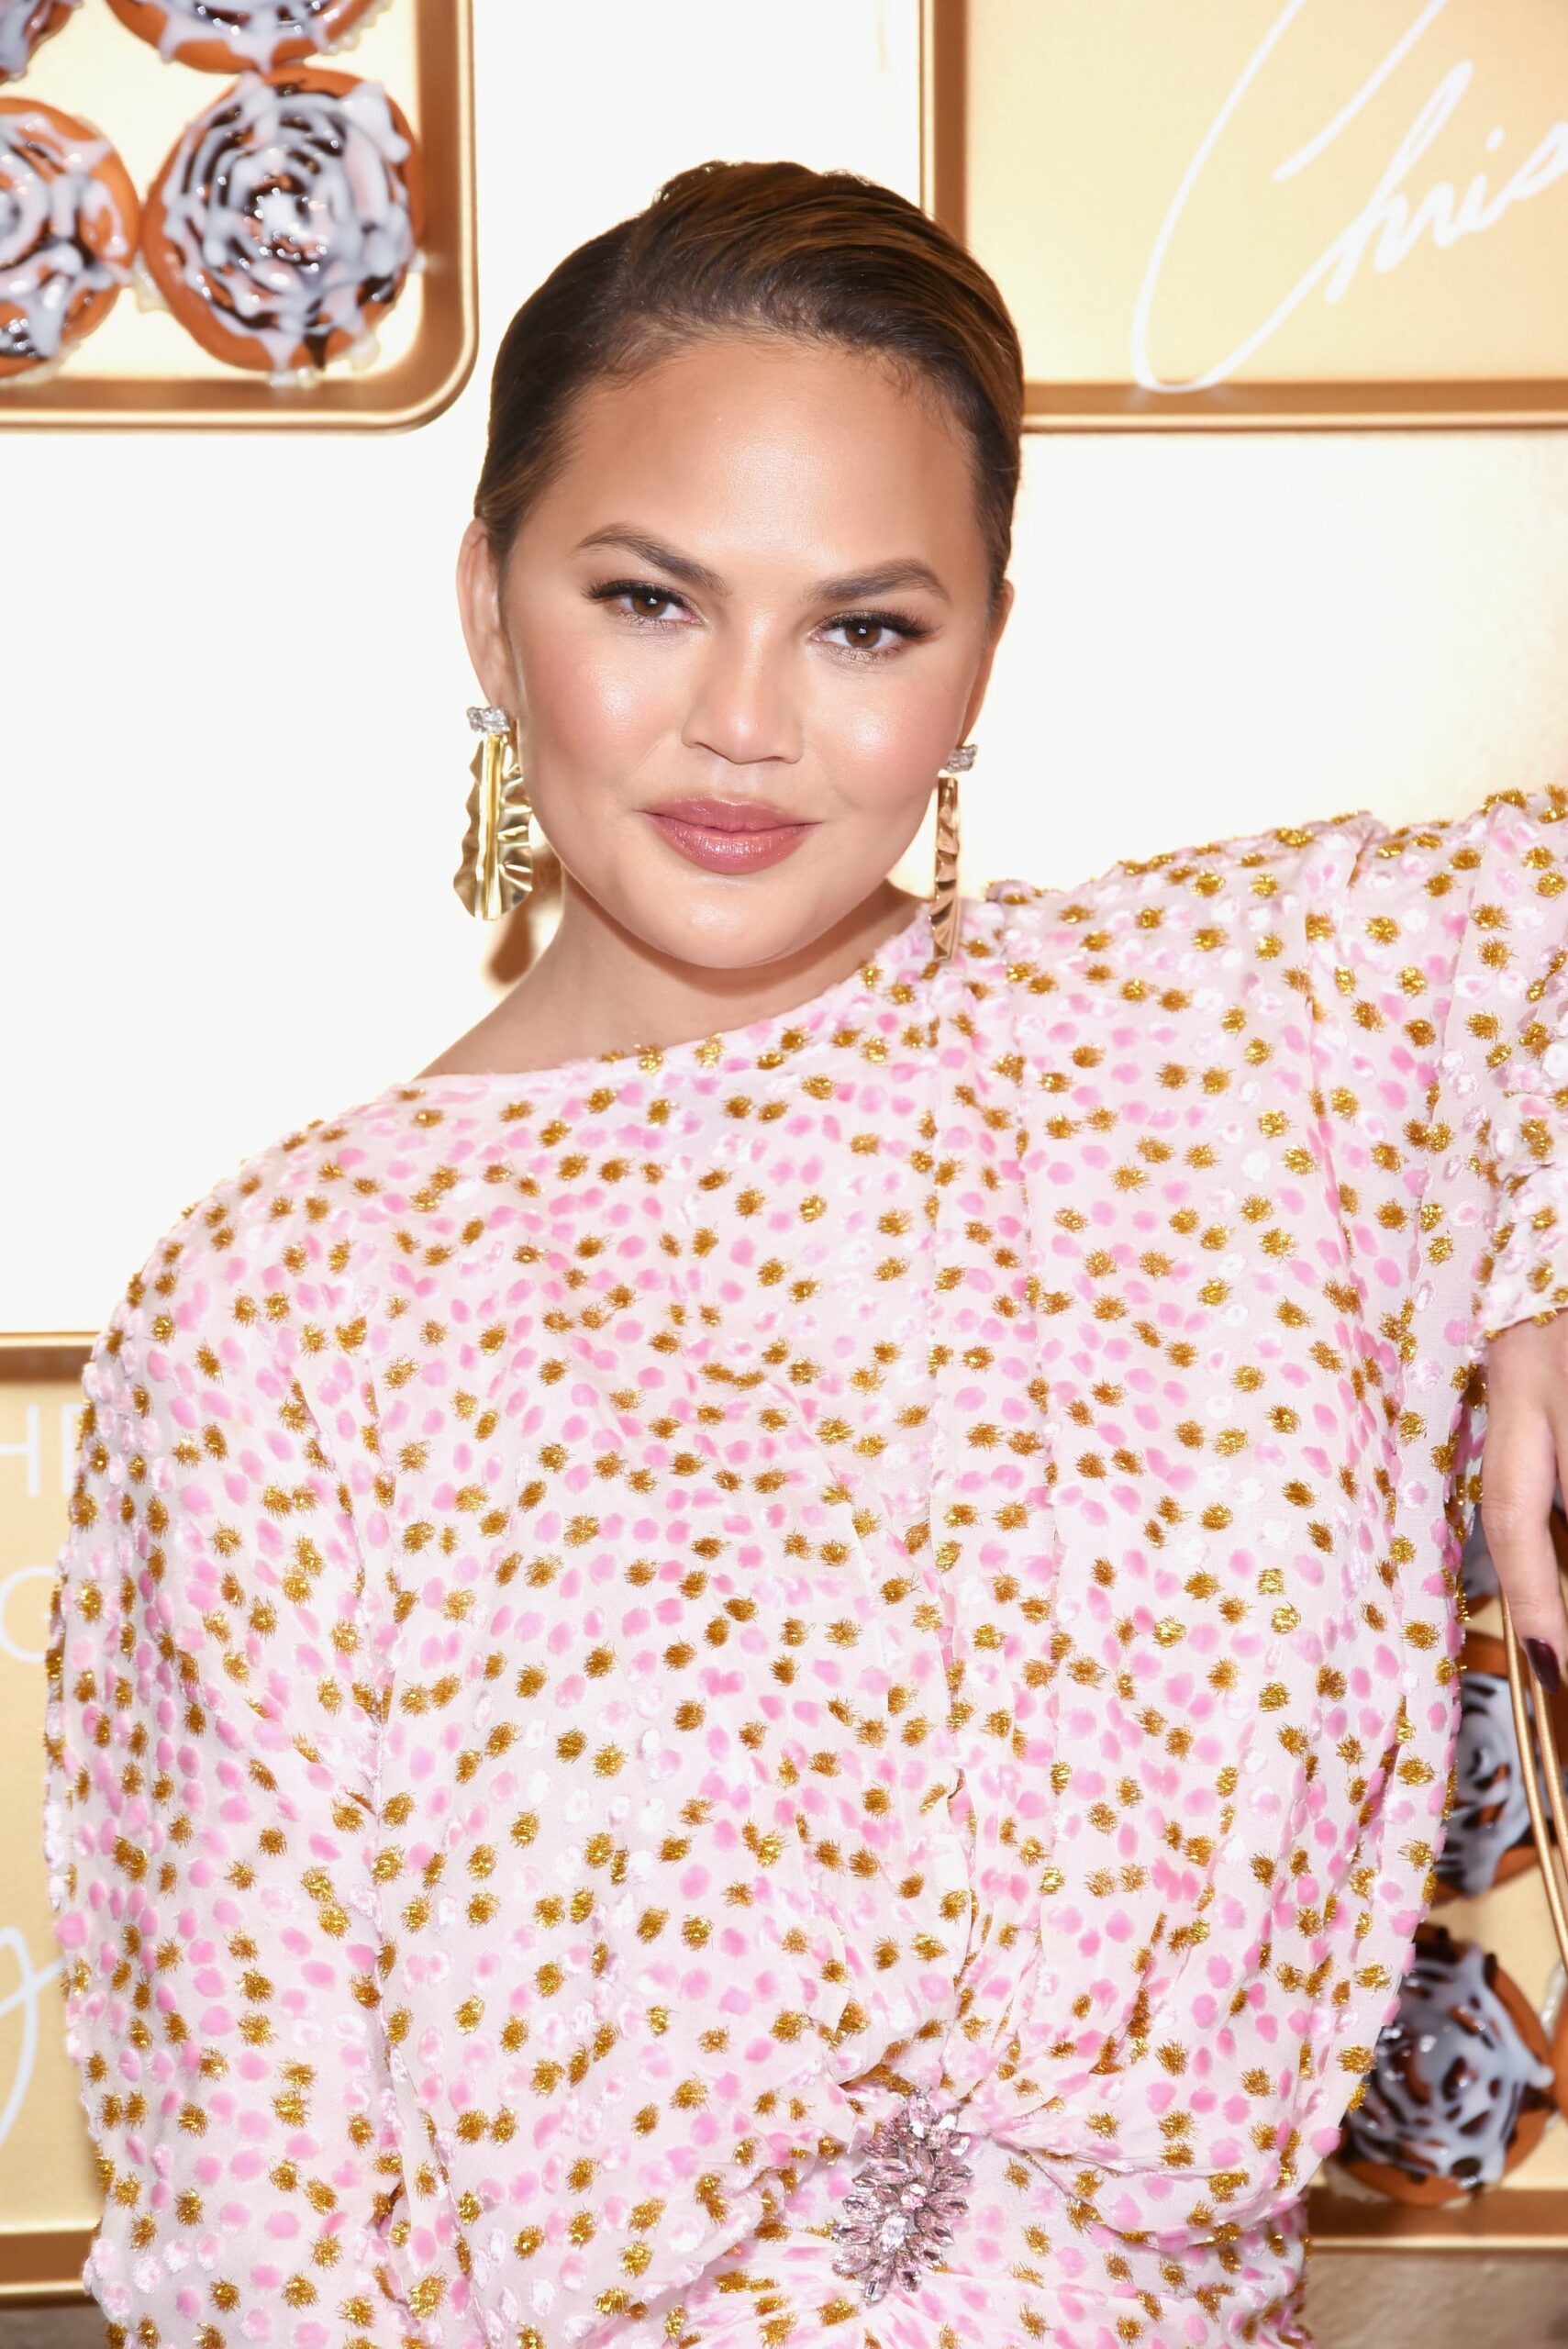 LOS ANGELES, CA - OCTOBER 21:  Chrissy Teigen attends SEPHORiA: House of Beauty - Session Four at The Majestic Downtown on October 21, 2018 in Los Angeles, California.  (Photo by Presley Ann/Getty Images for Sephora)